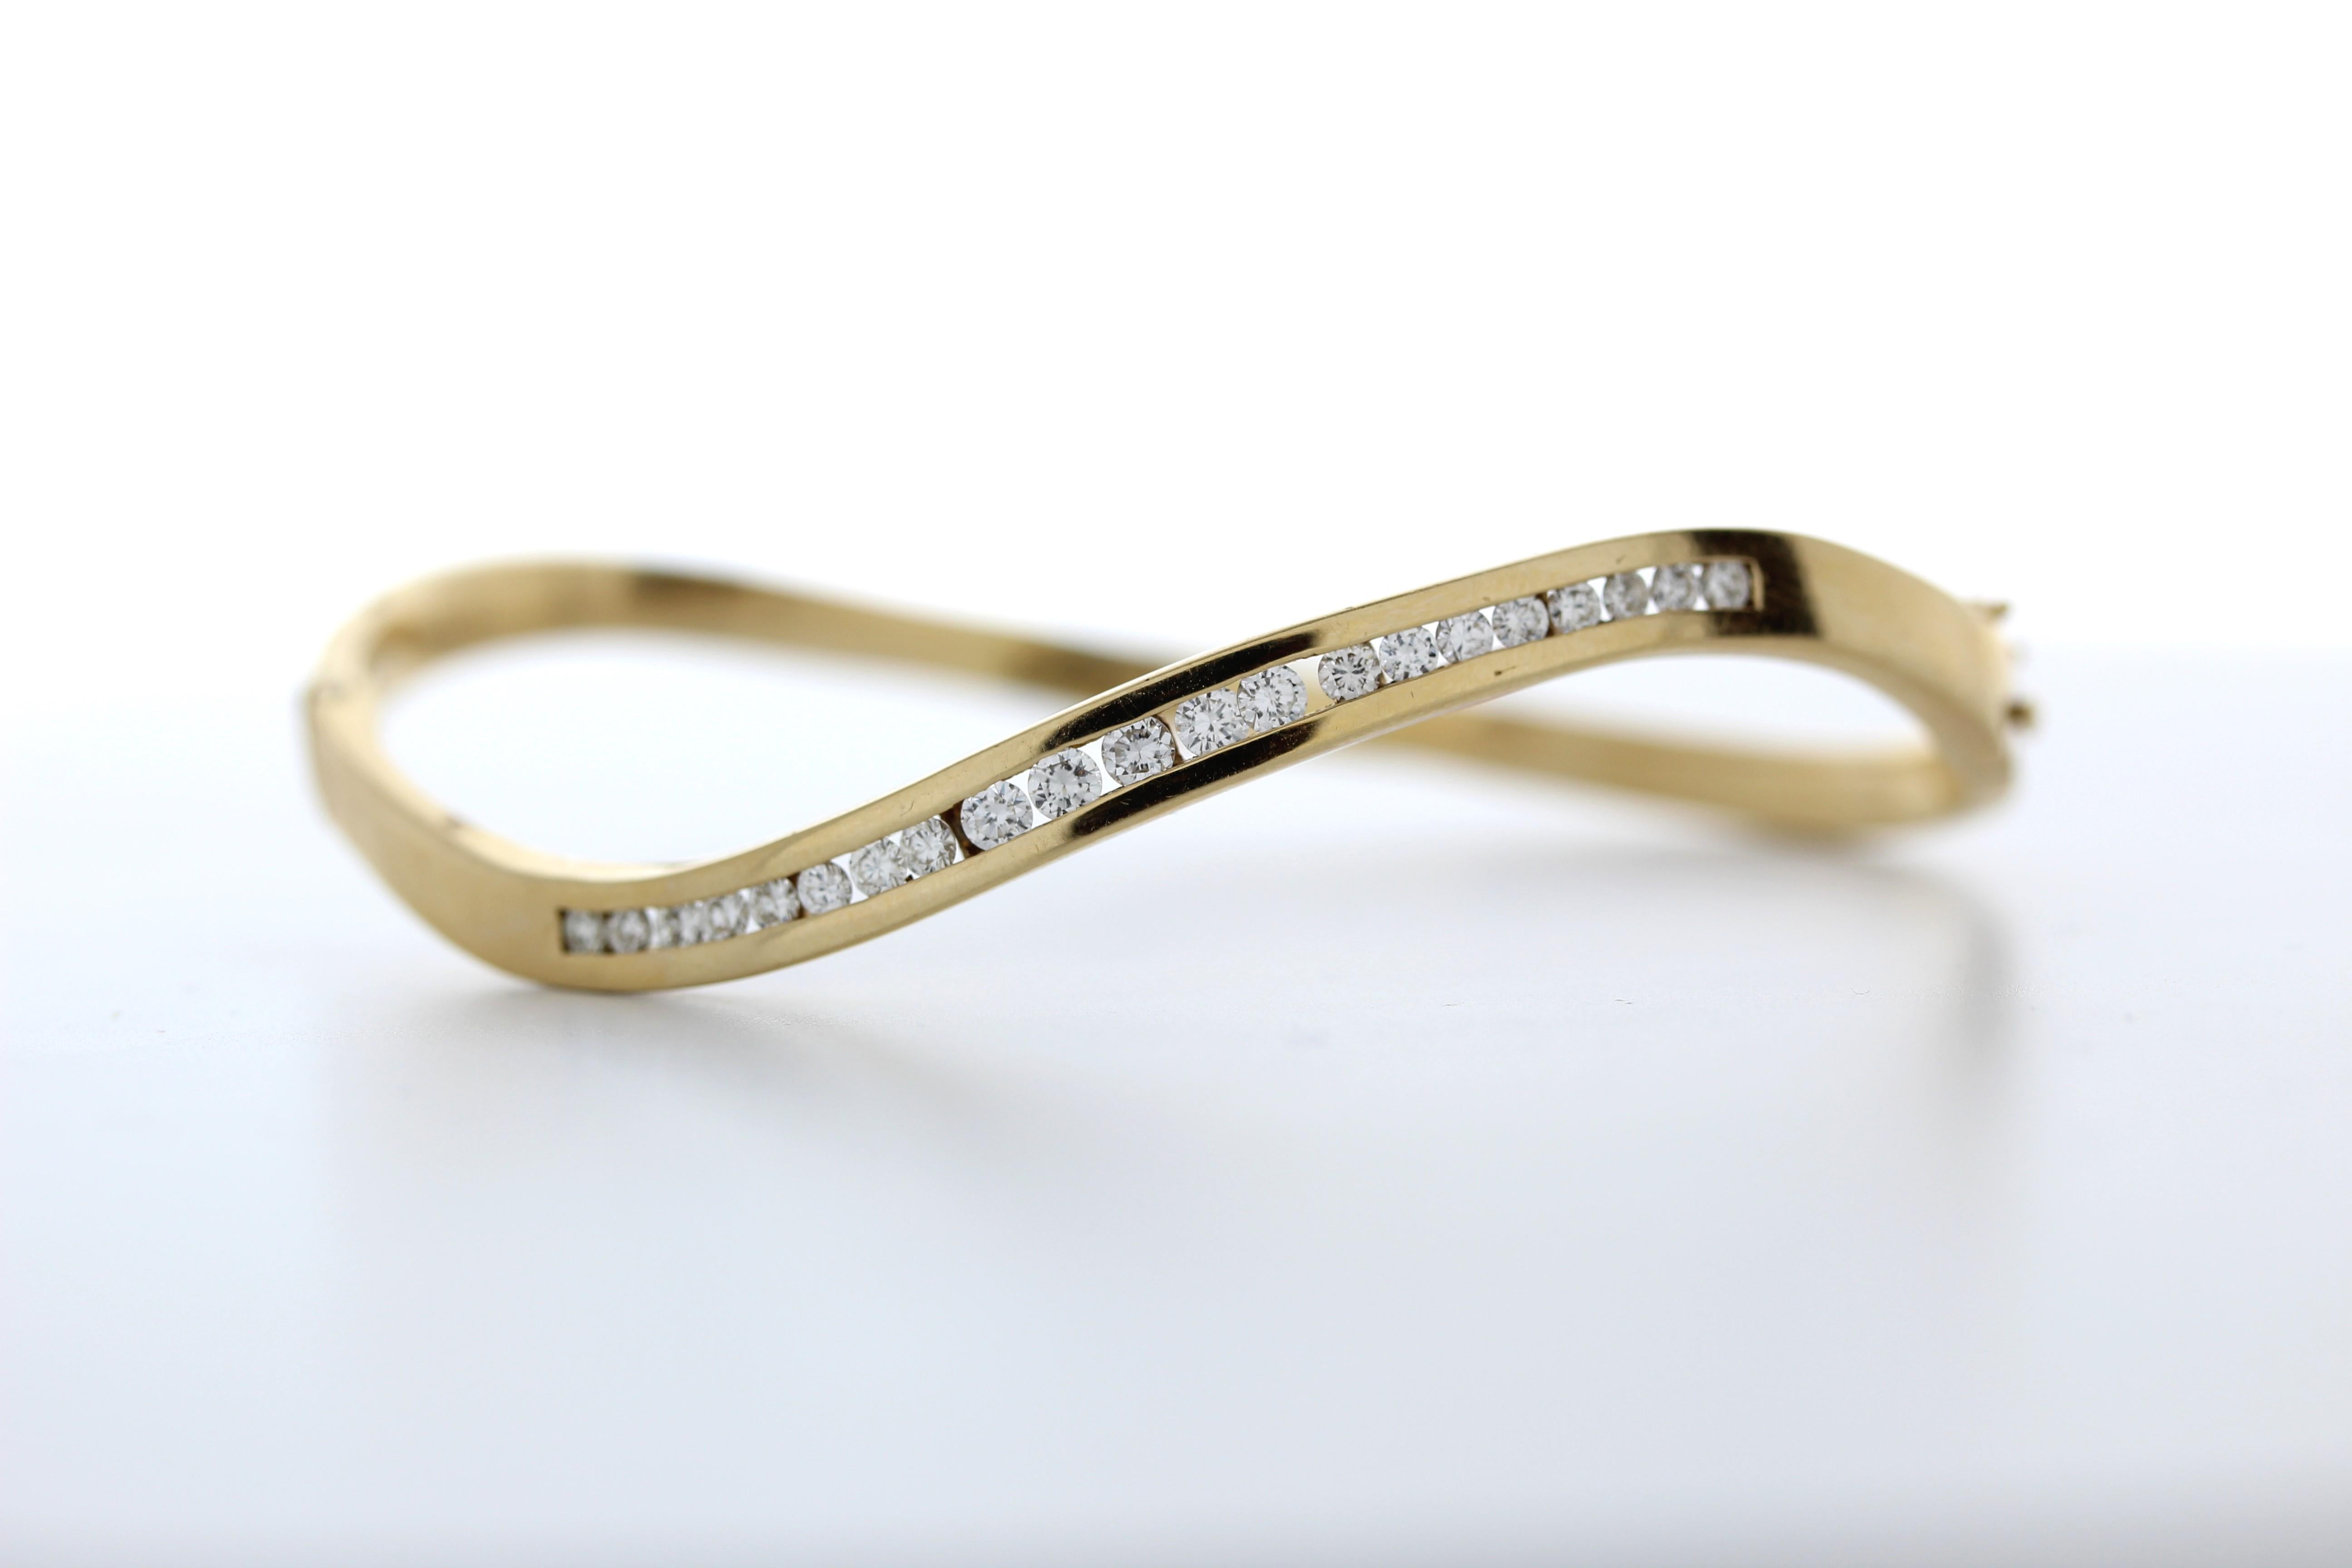 A fashion bracelet featuring diamonds set in 14k yellow gold with a main stone of round-cut diamonds weighing 0.75 carats would be a beautiful and stylish choice. The round-cut diamonds add a classic and timeless sparkle to the bracelet.